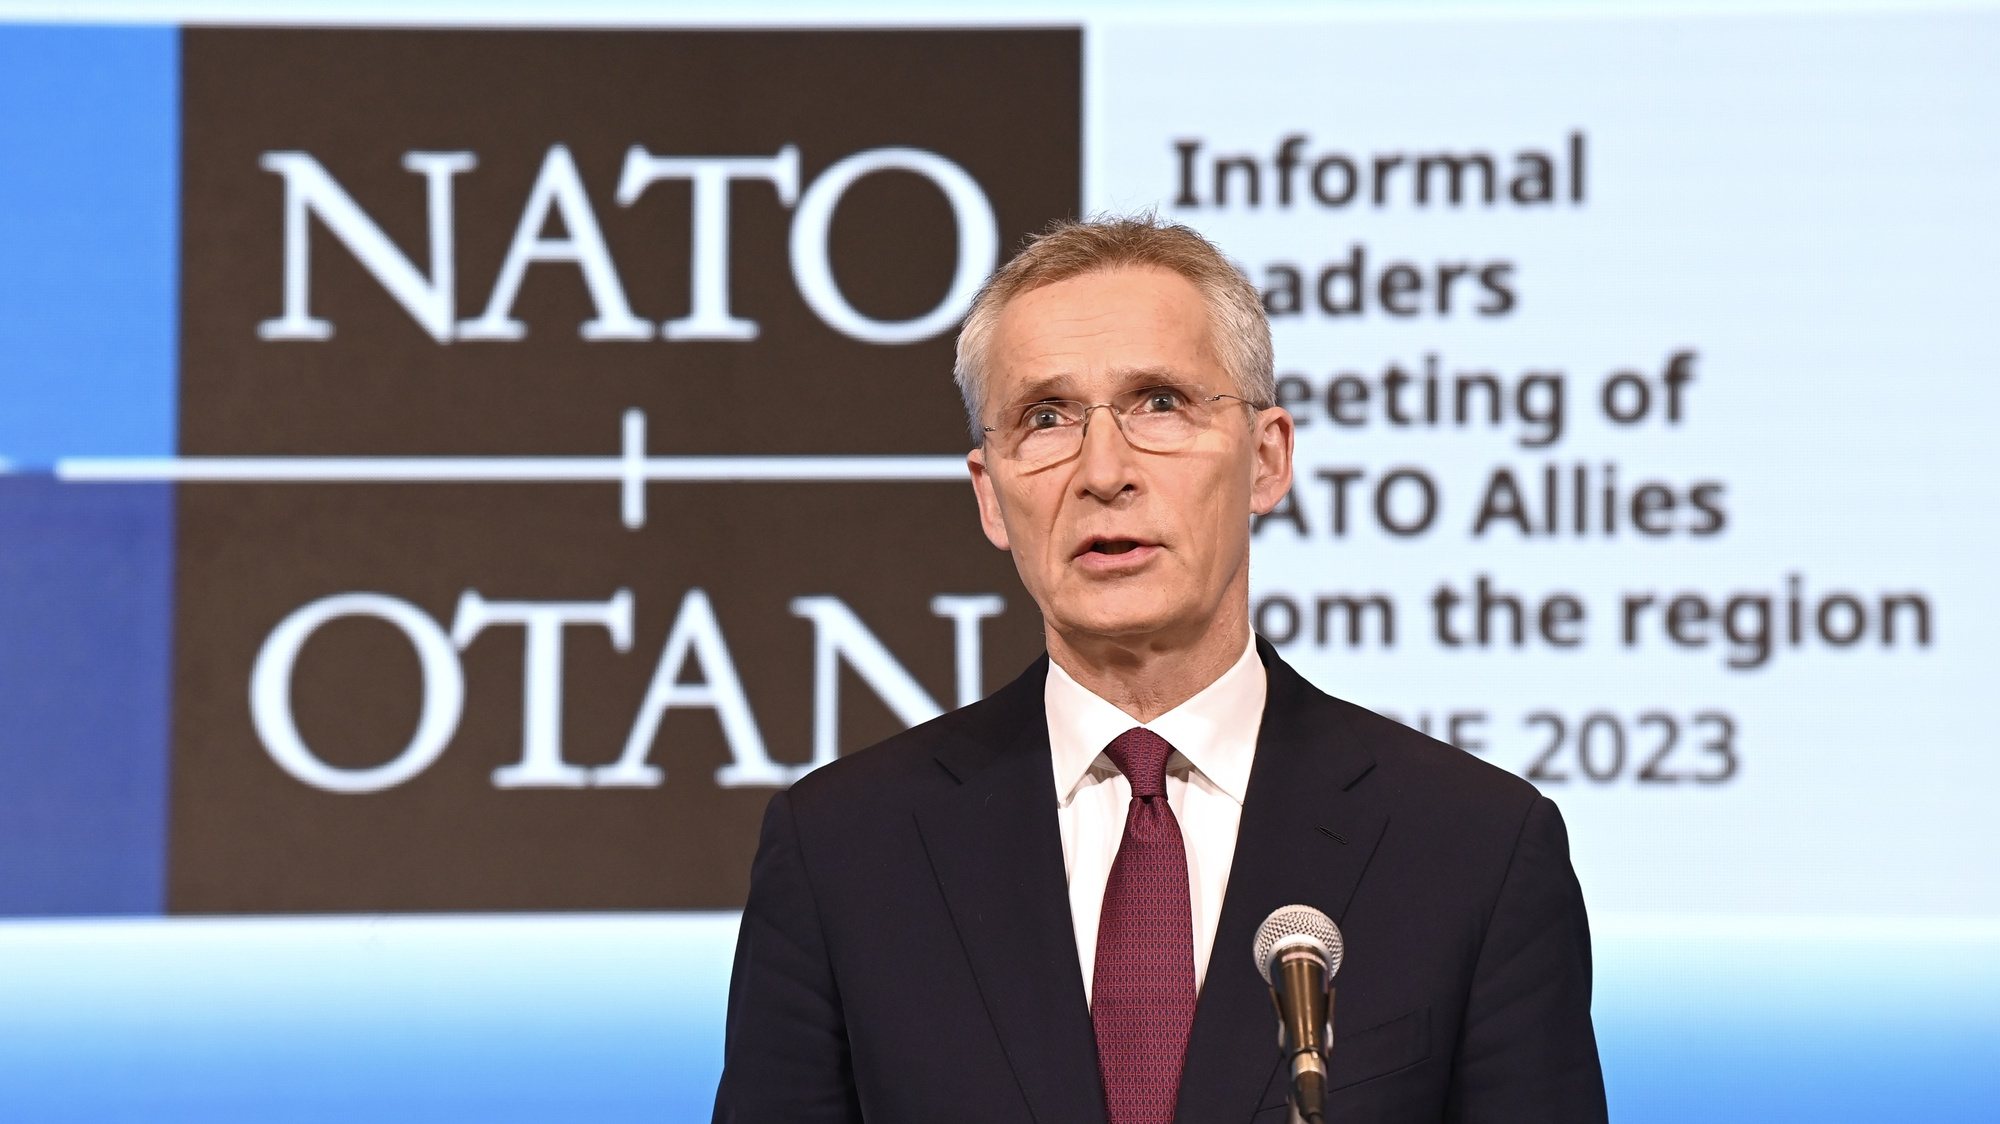 epa10989248 NATO Secretary-General Jens Stoltenberg speaks during a joint press conference after an informal meeting with leaders of the NATO alliance&#039;s members in the Western Balkans, in Skopje, Republic of North Macedonia, 22 November 2023. NATO Secretary General Jens Stoltenberg is on a two-day official visit to North Macedonia from 21 to 22 November.  EPA/GEORGI LICOVSKI